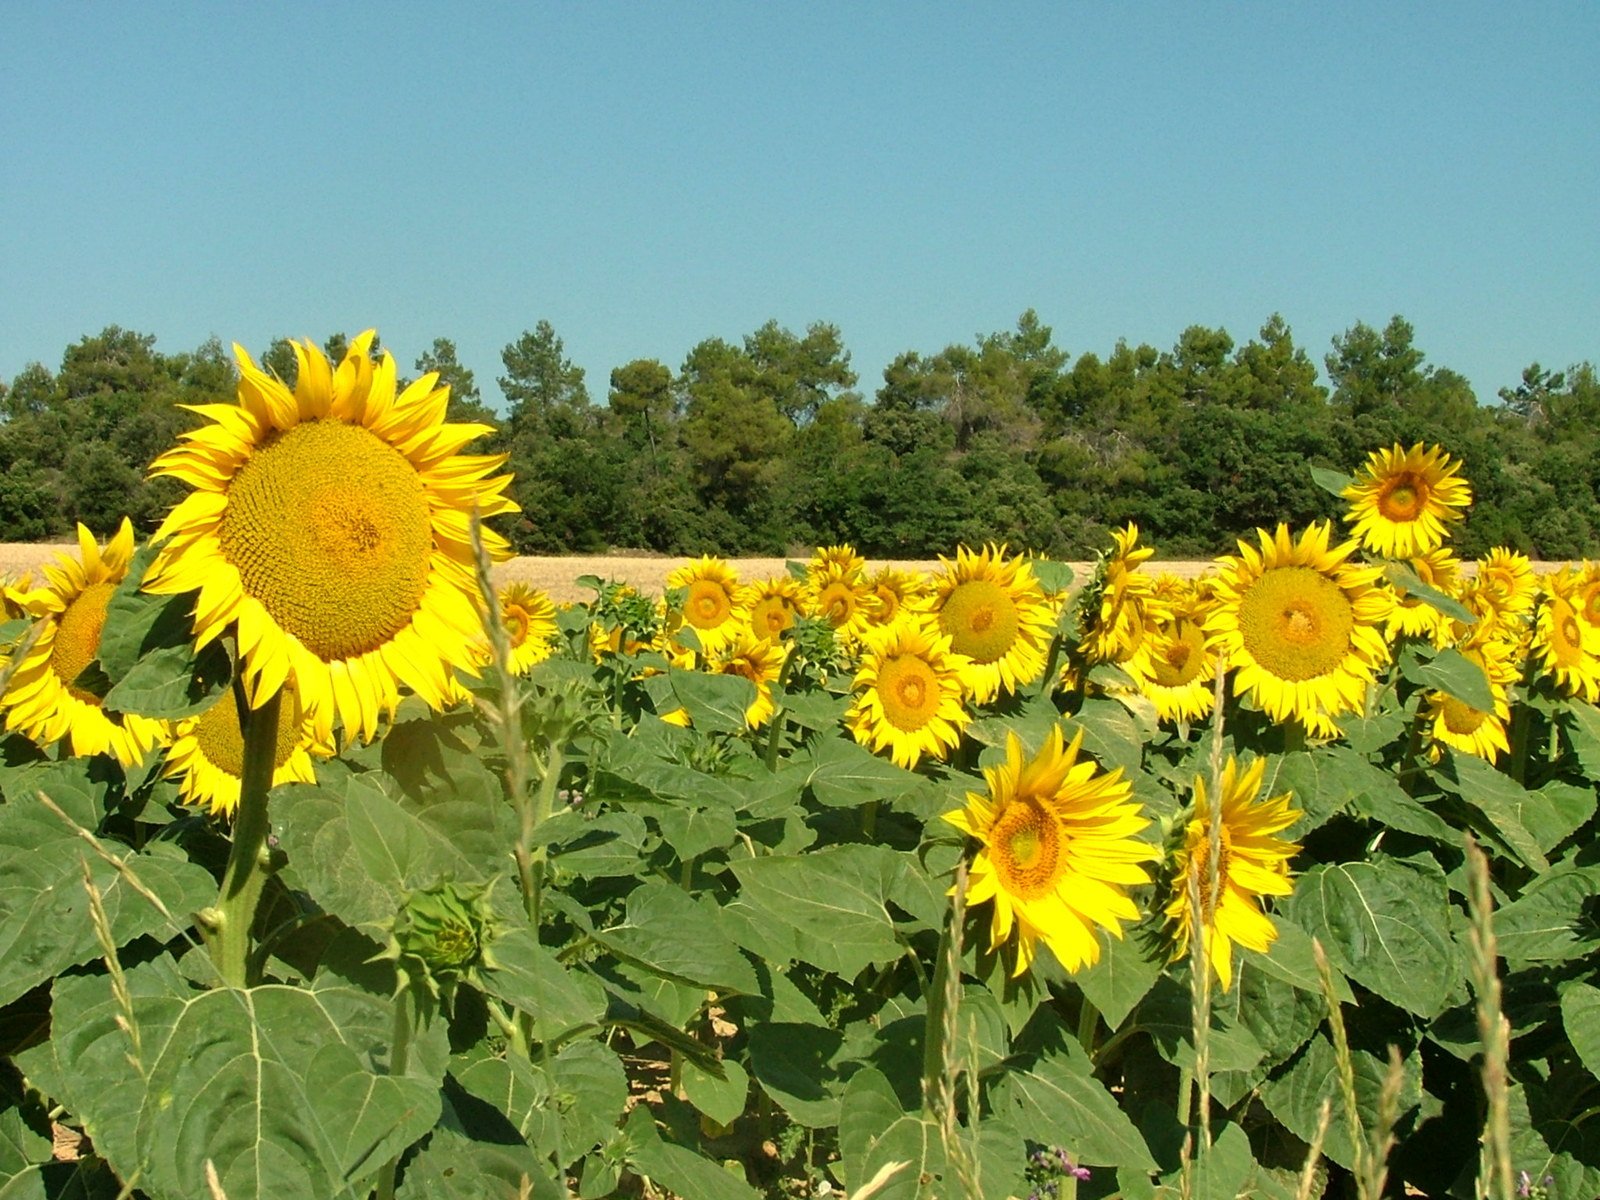 large field of sunflowers with many large leaves